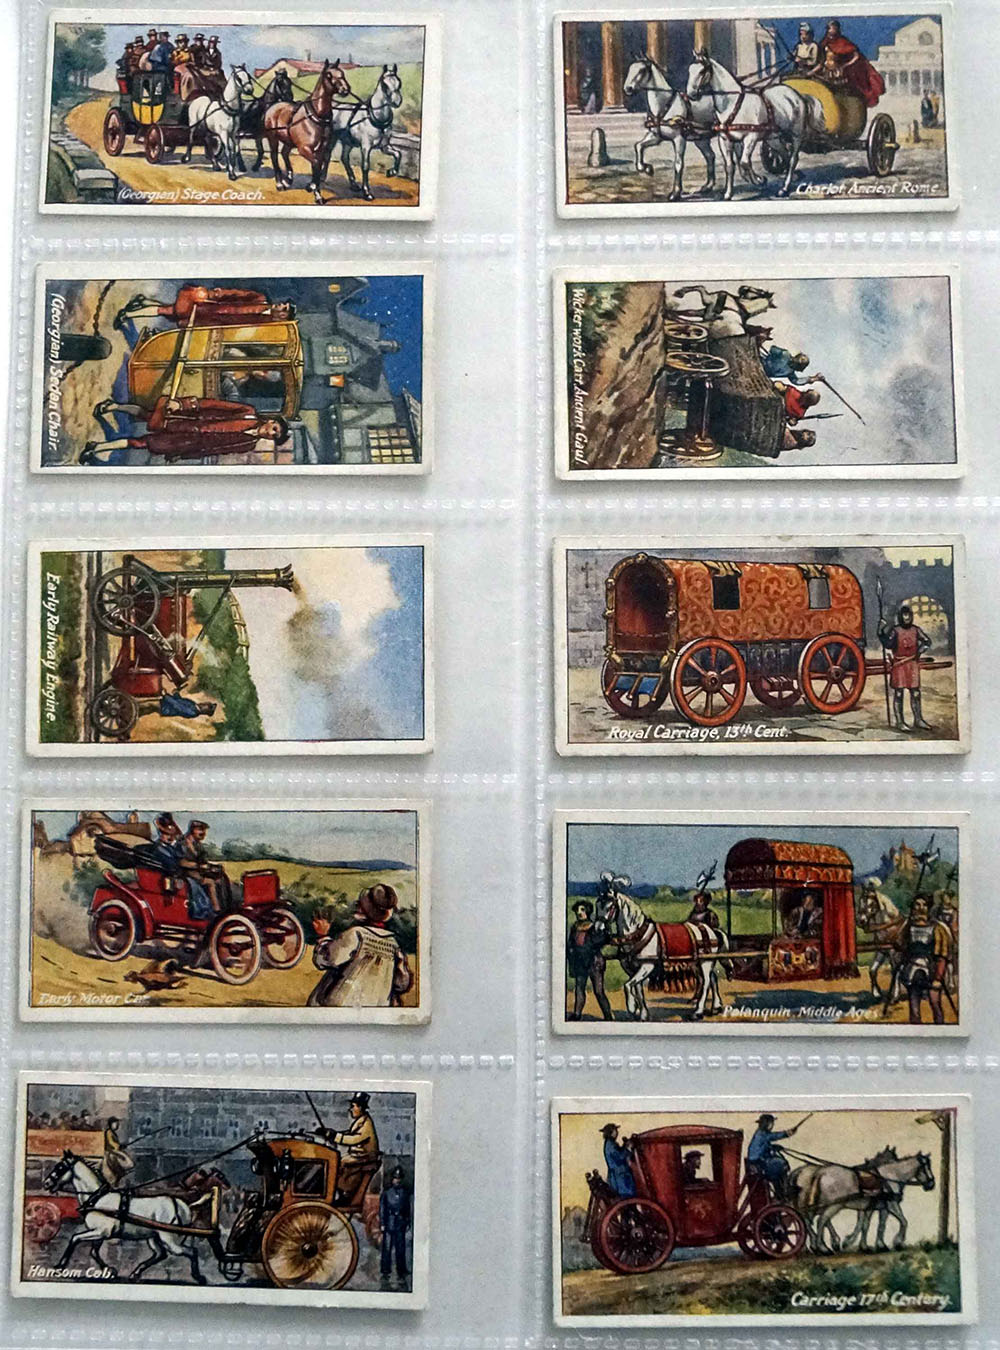 Full Set of 25 Cigarette Cards: Vehicles of All Ages (1924) at The Book Palace